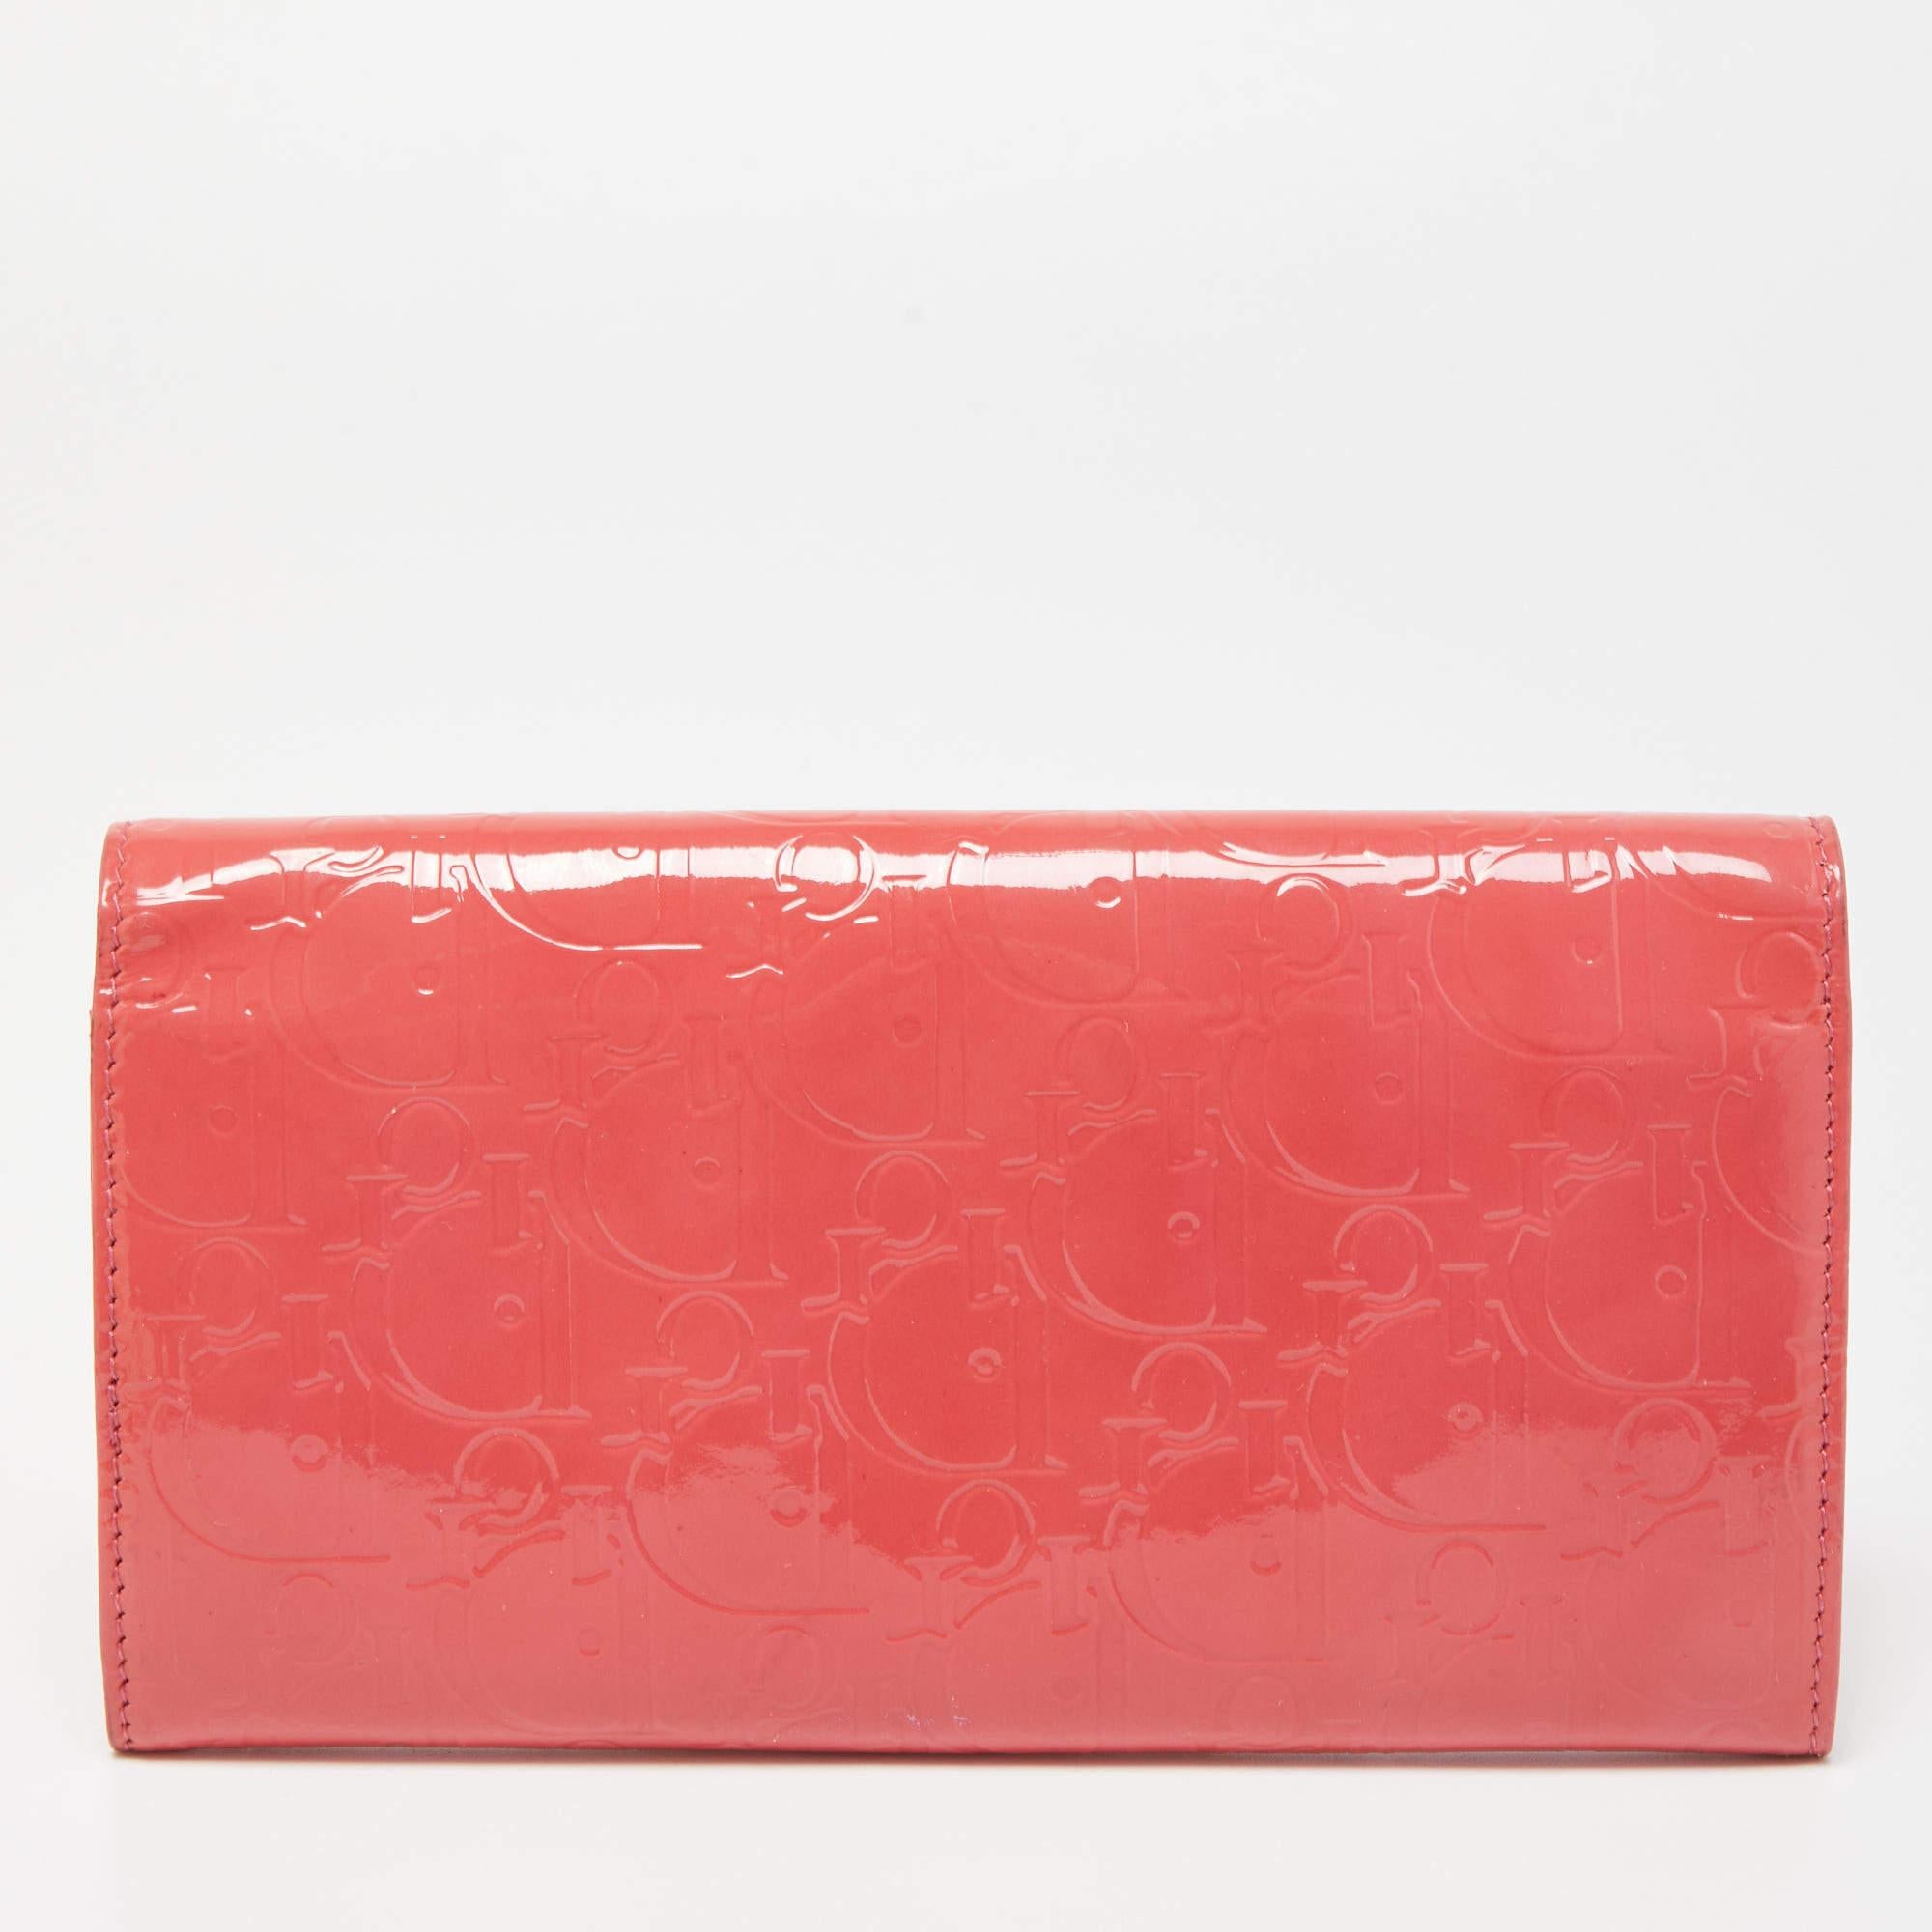 This Dior pink wallet is a luxurious accessory that will prove to be super functional. It is made using durable materials on the exterior and unveils a well-organized interior.

